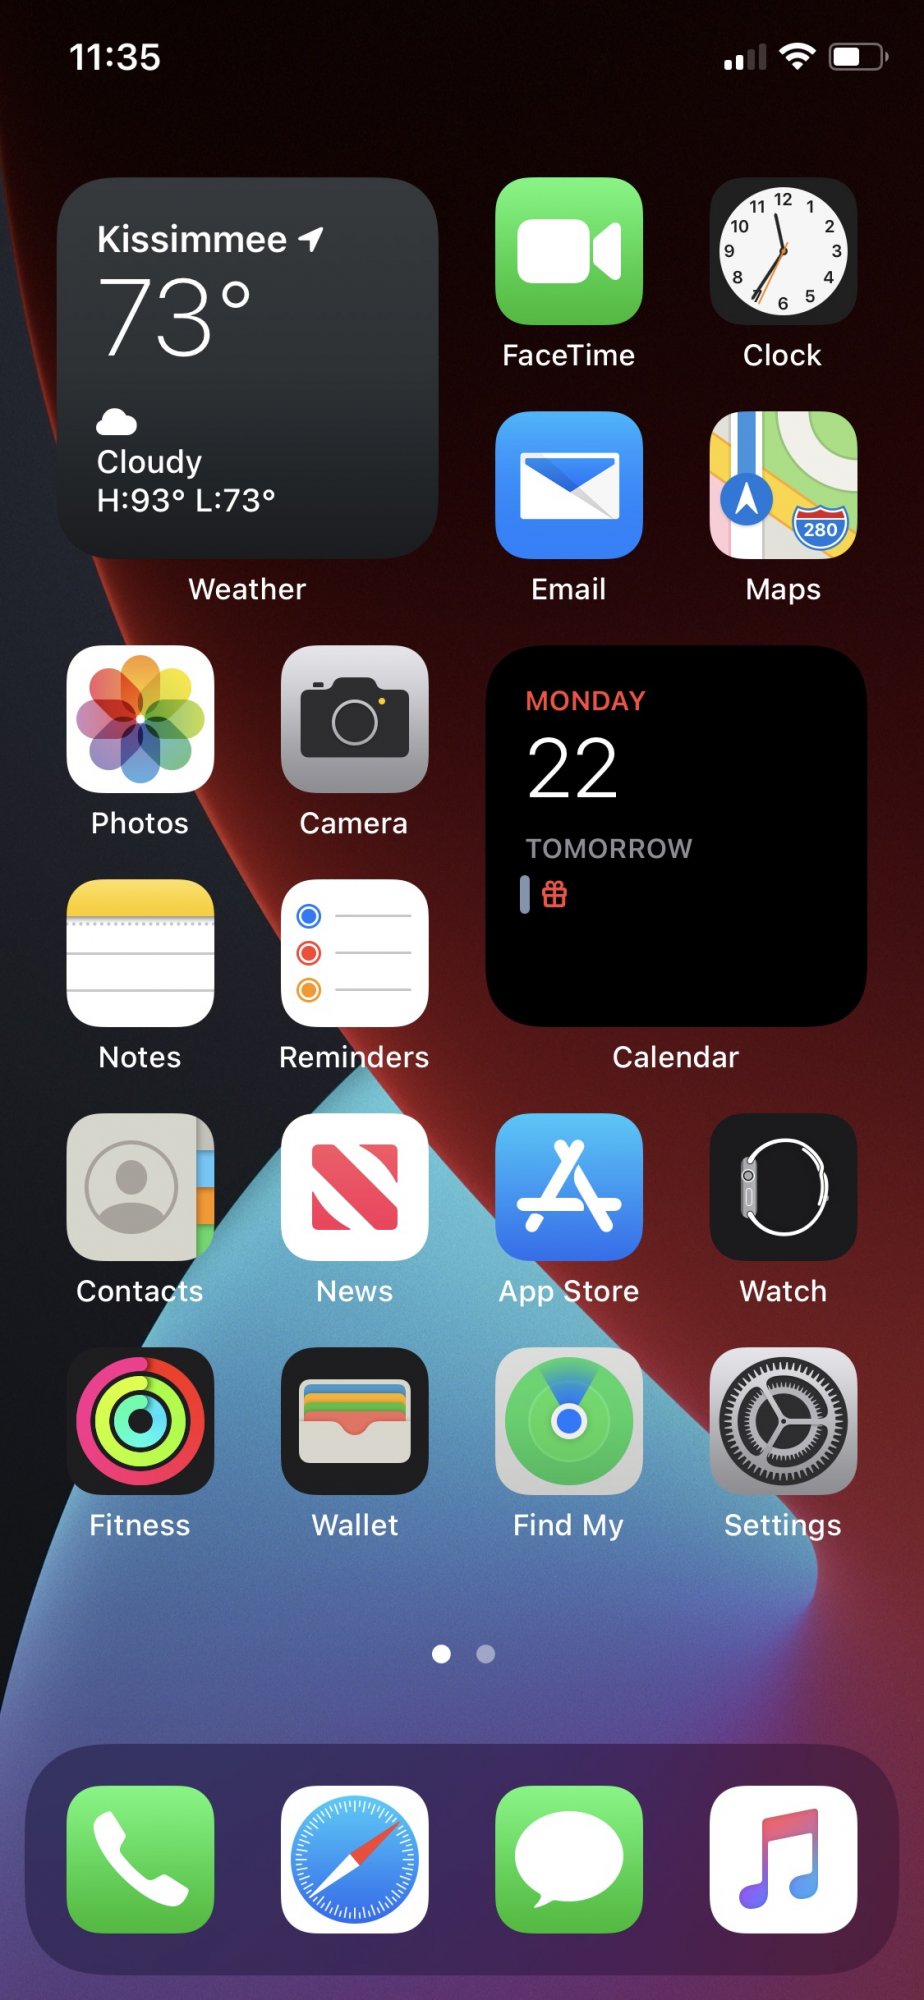 Post your iOS 14 home screen layout | MacRumors Forums